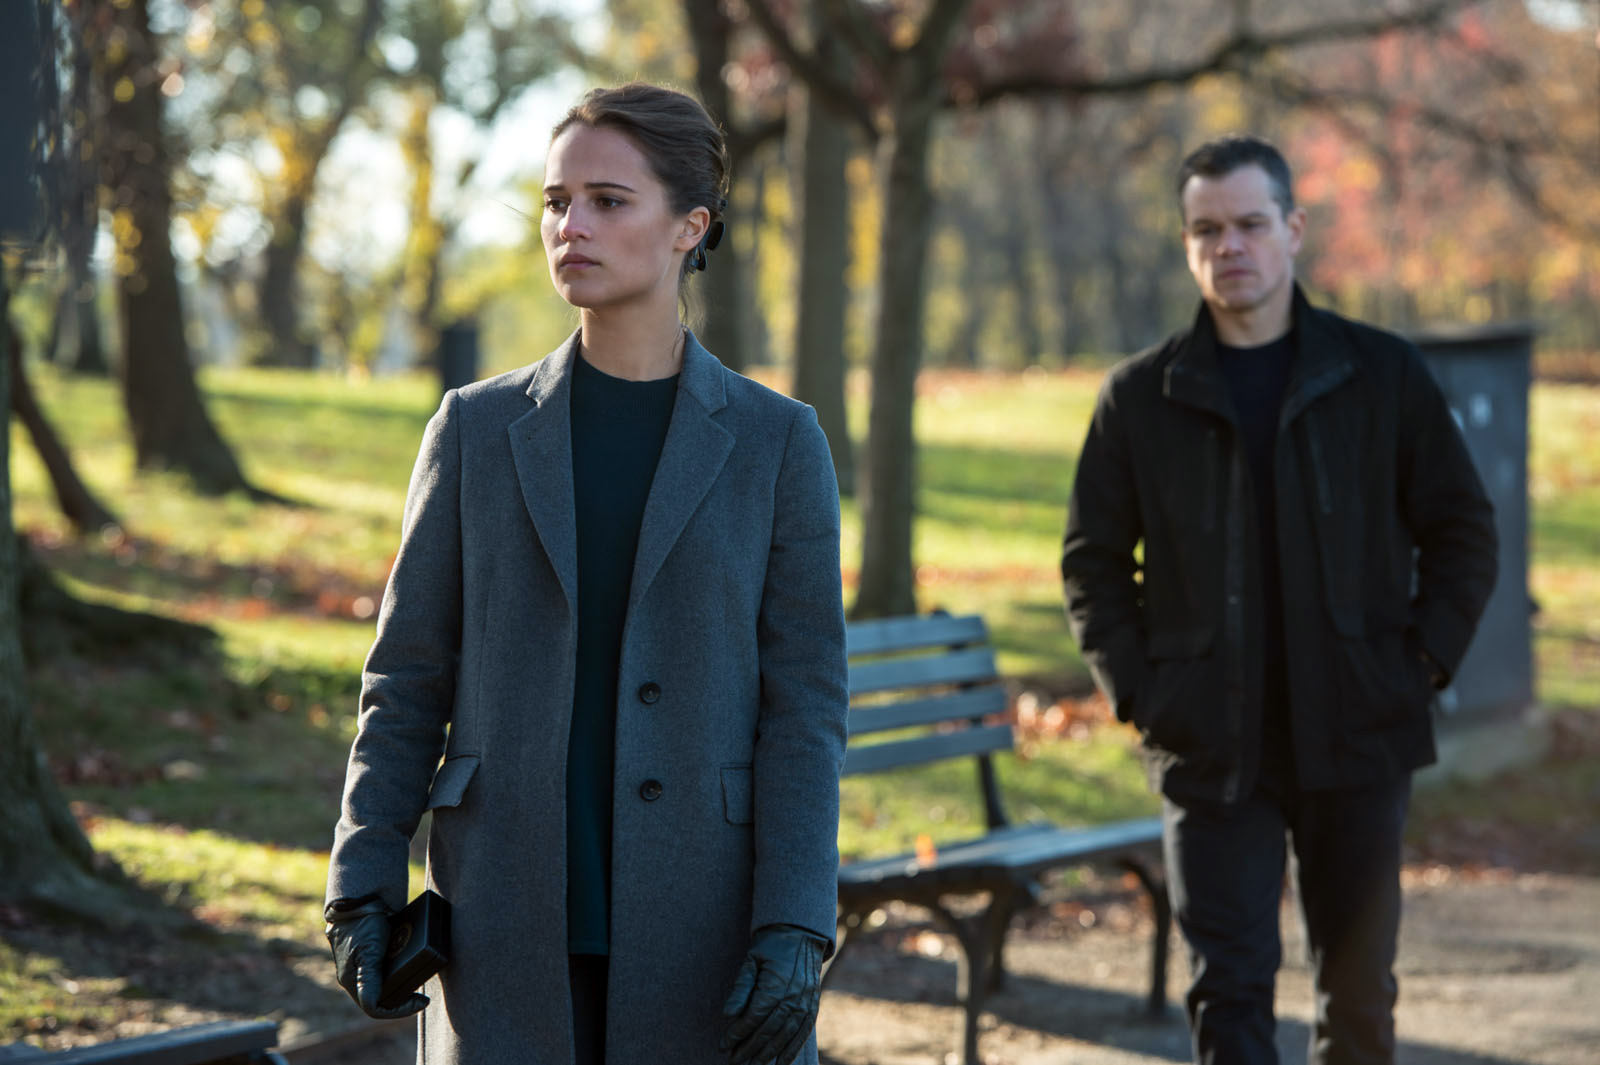 WELCOME ADDITION: Alicia Vikander plays a great role in Jason Bourne.